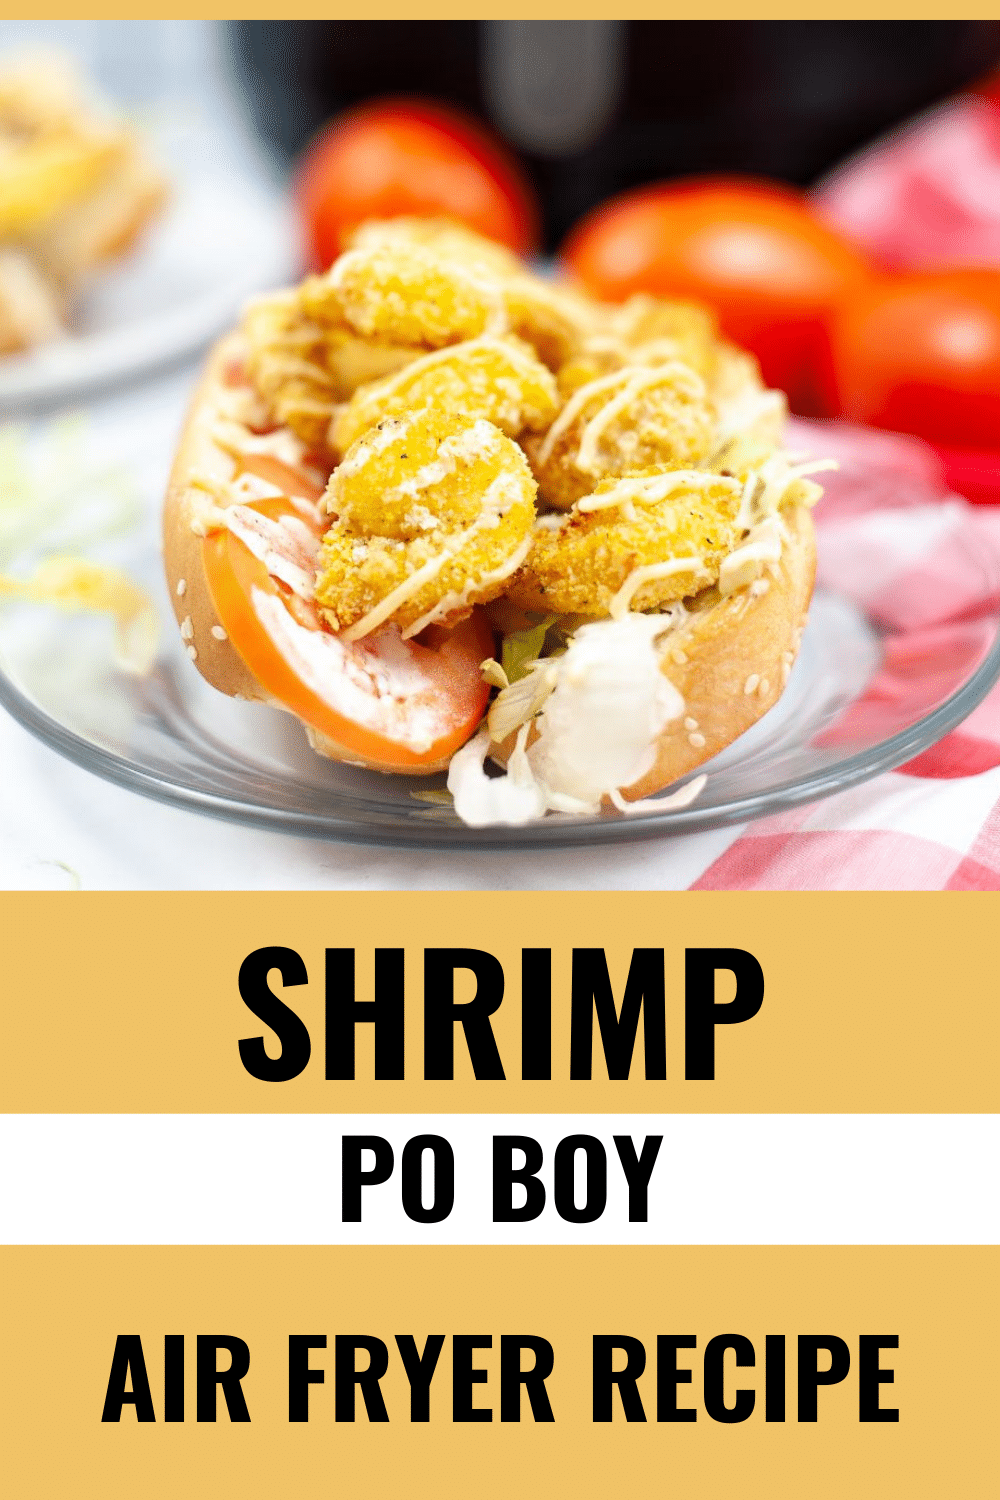 Air Fryer Shrimp Po Boy on a glass serving plate with tomatoes on the side and a large text at the bottom saying "Shrimp Po Boy Air Fryer Recipe"